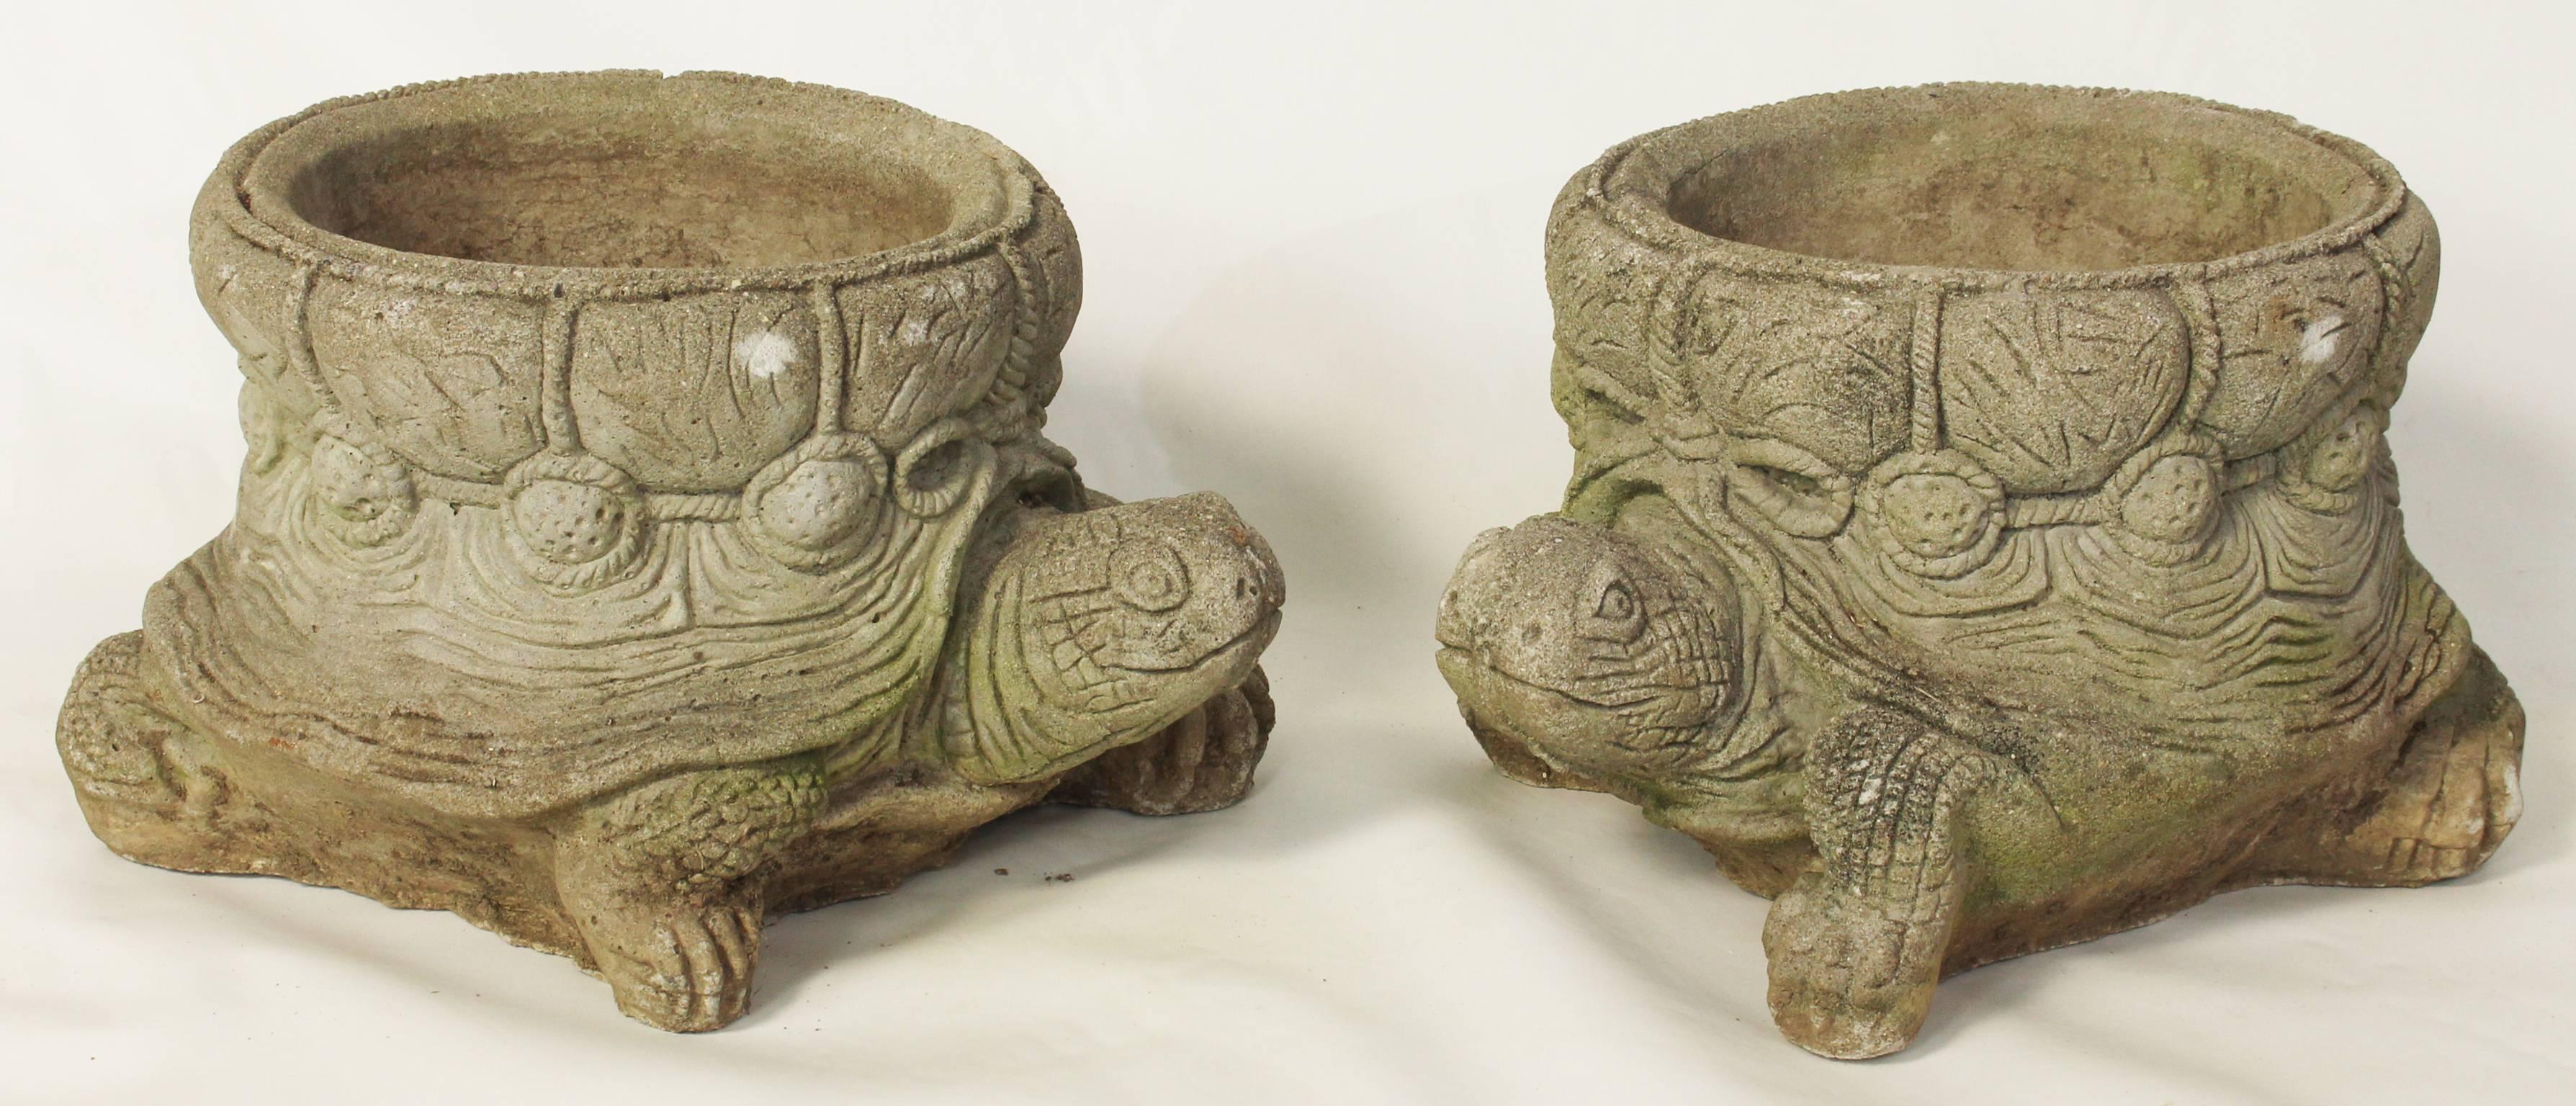 A charming pair of cast stone garden planters in the form of turtles dating from the 1960s.